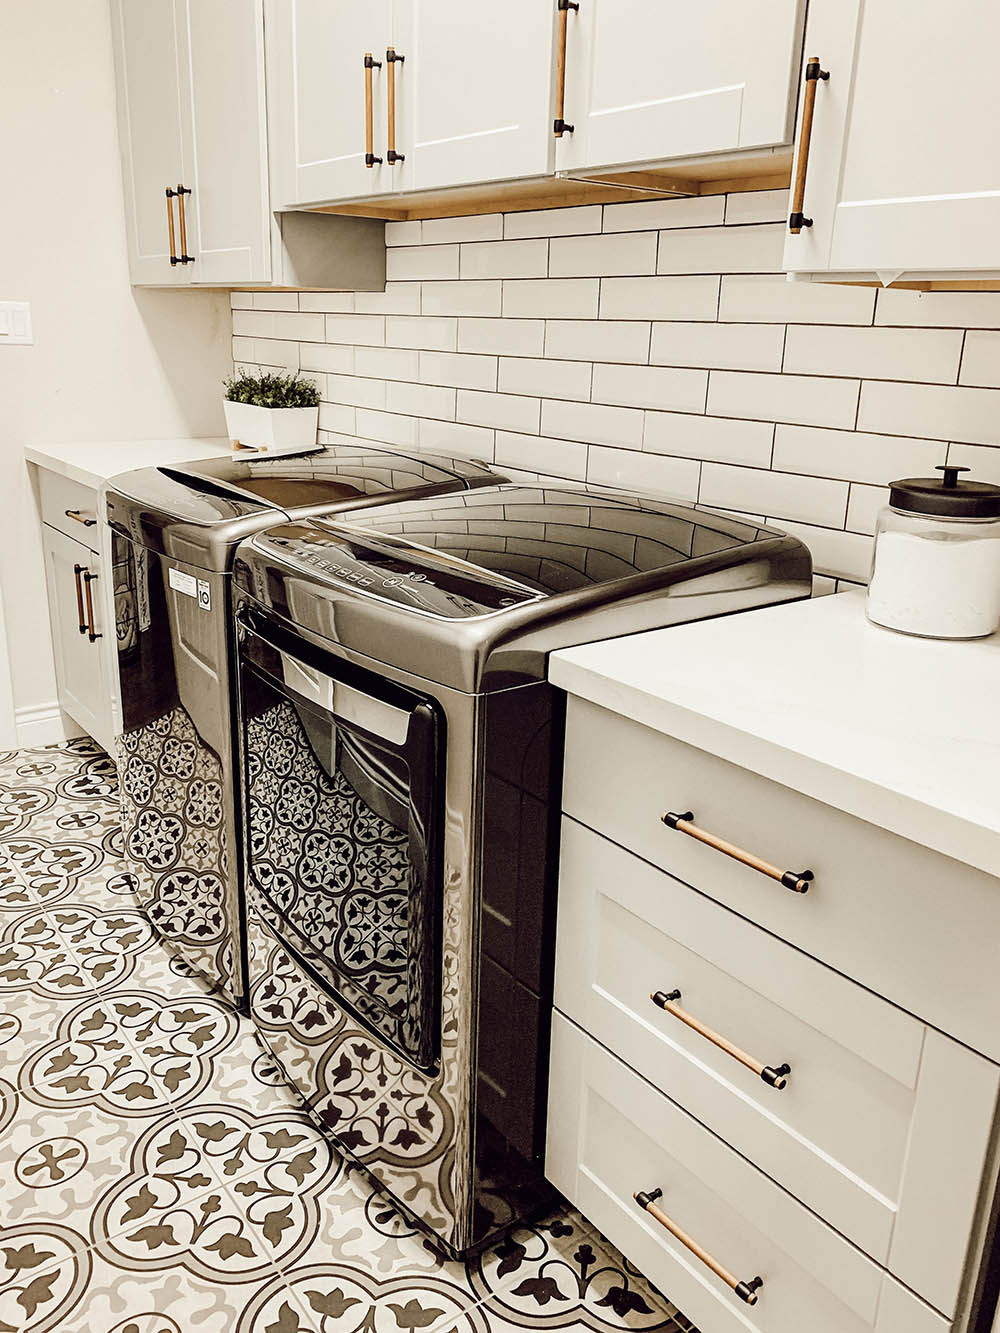 A laundry with grey cabinets and gold hardware, mosaic titled flooring, and a set of washer and dryers.